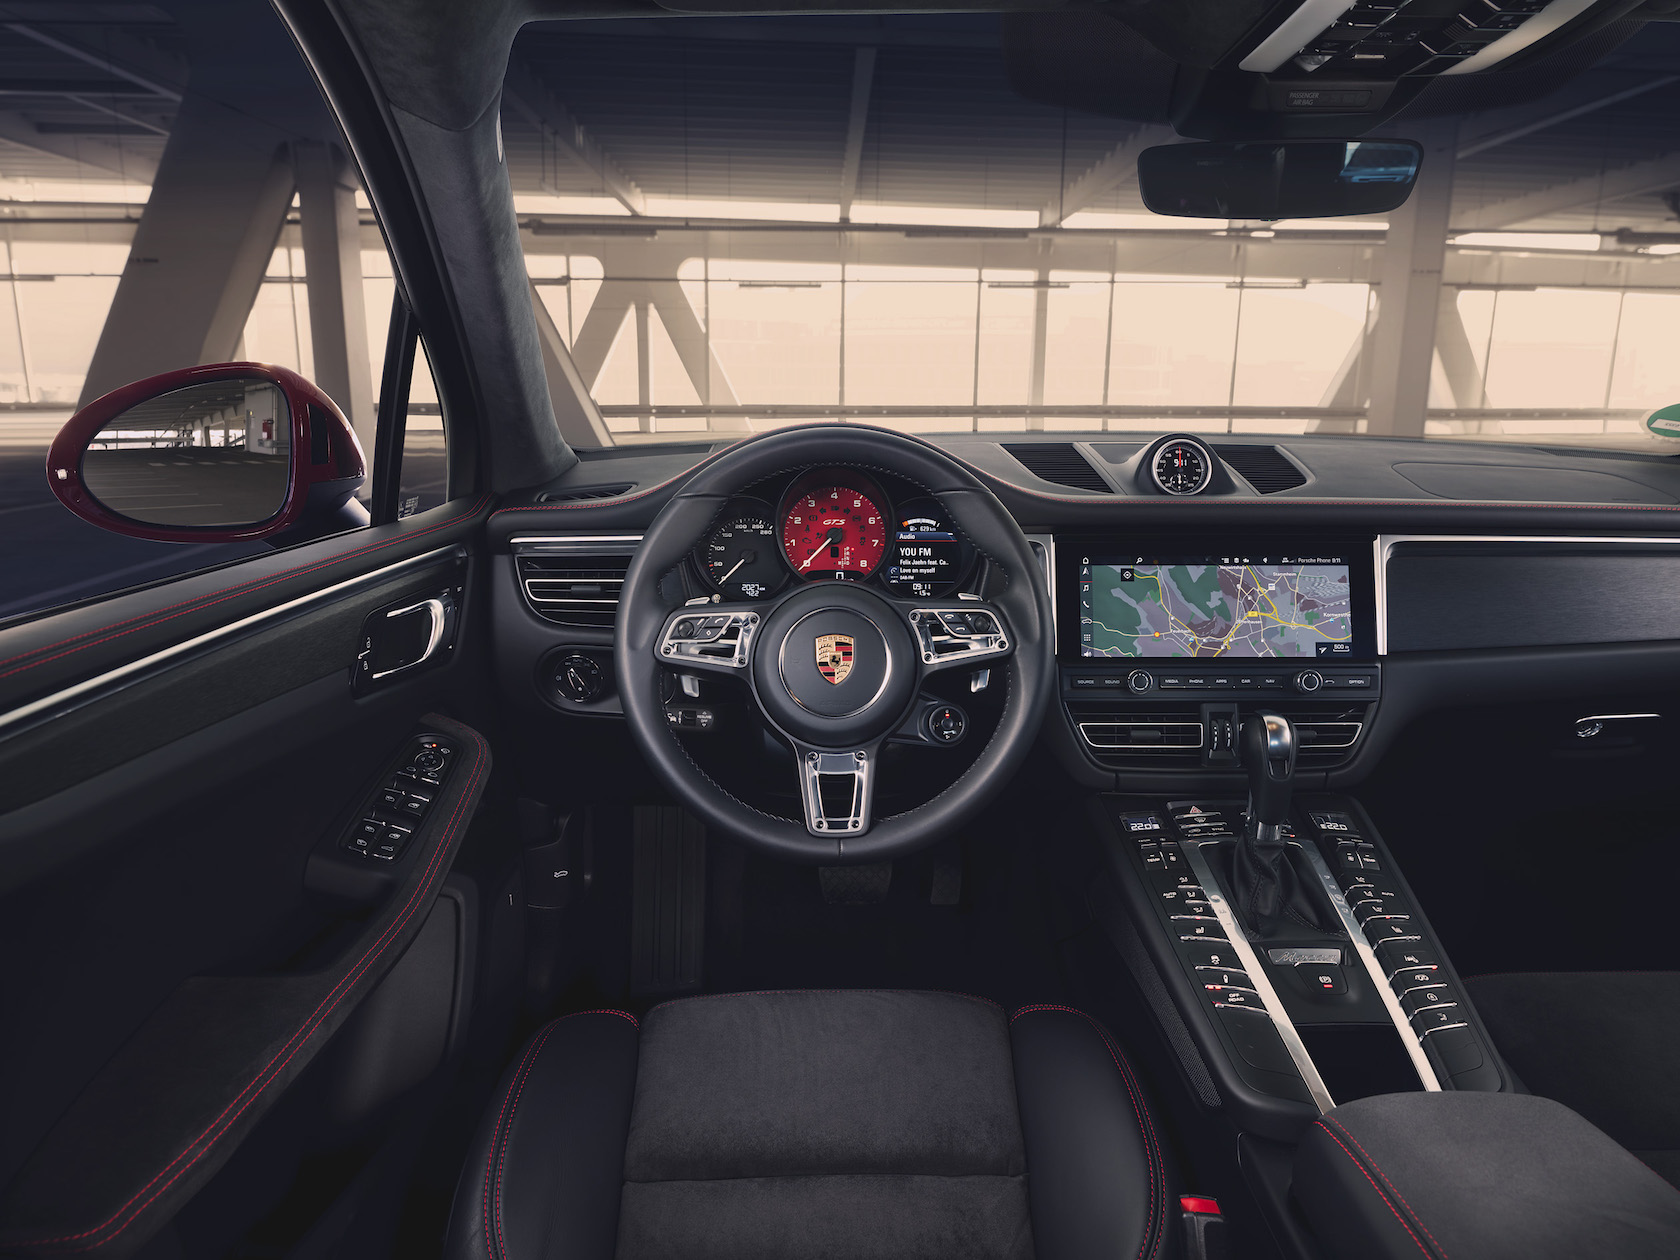 2020 Porsche Macan Gts Returns With More Power On Tap